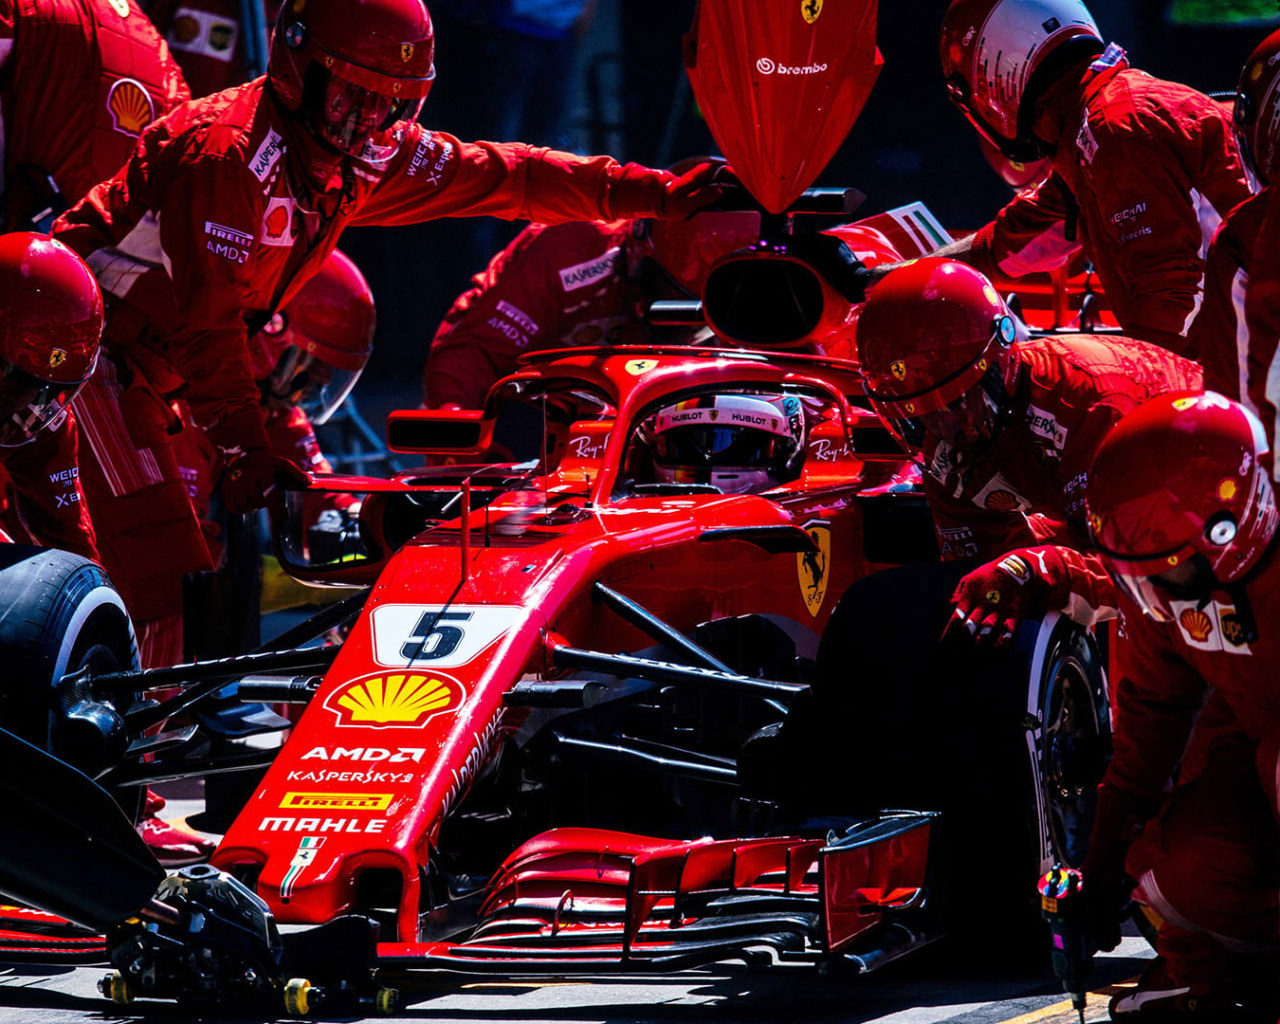 Wallpaper Ferrari F Formula Pit Stop, Group Of People • Wallpaper For You